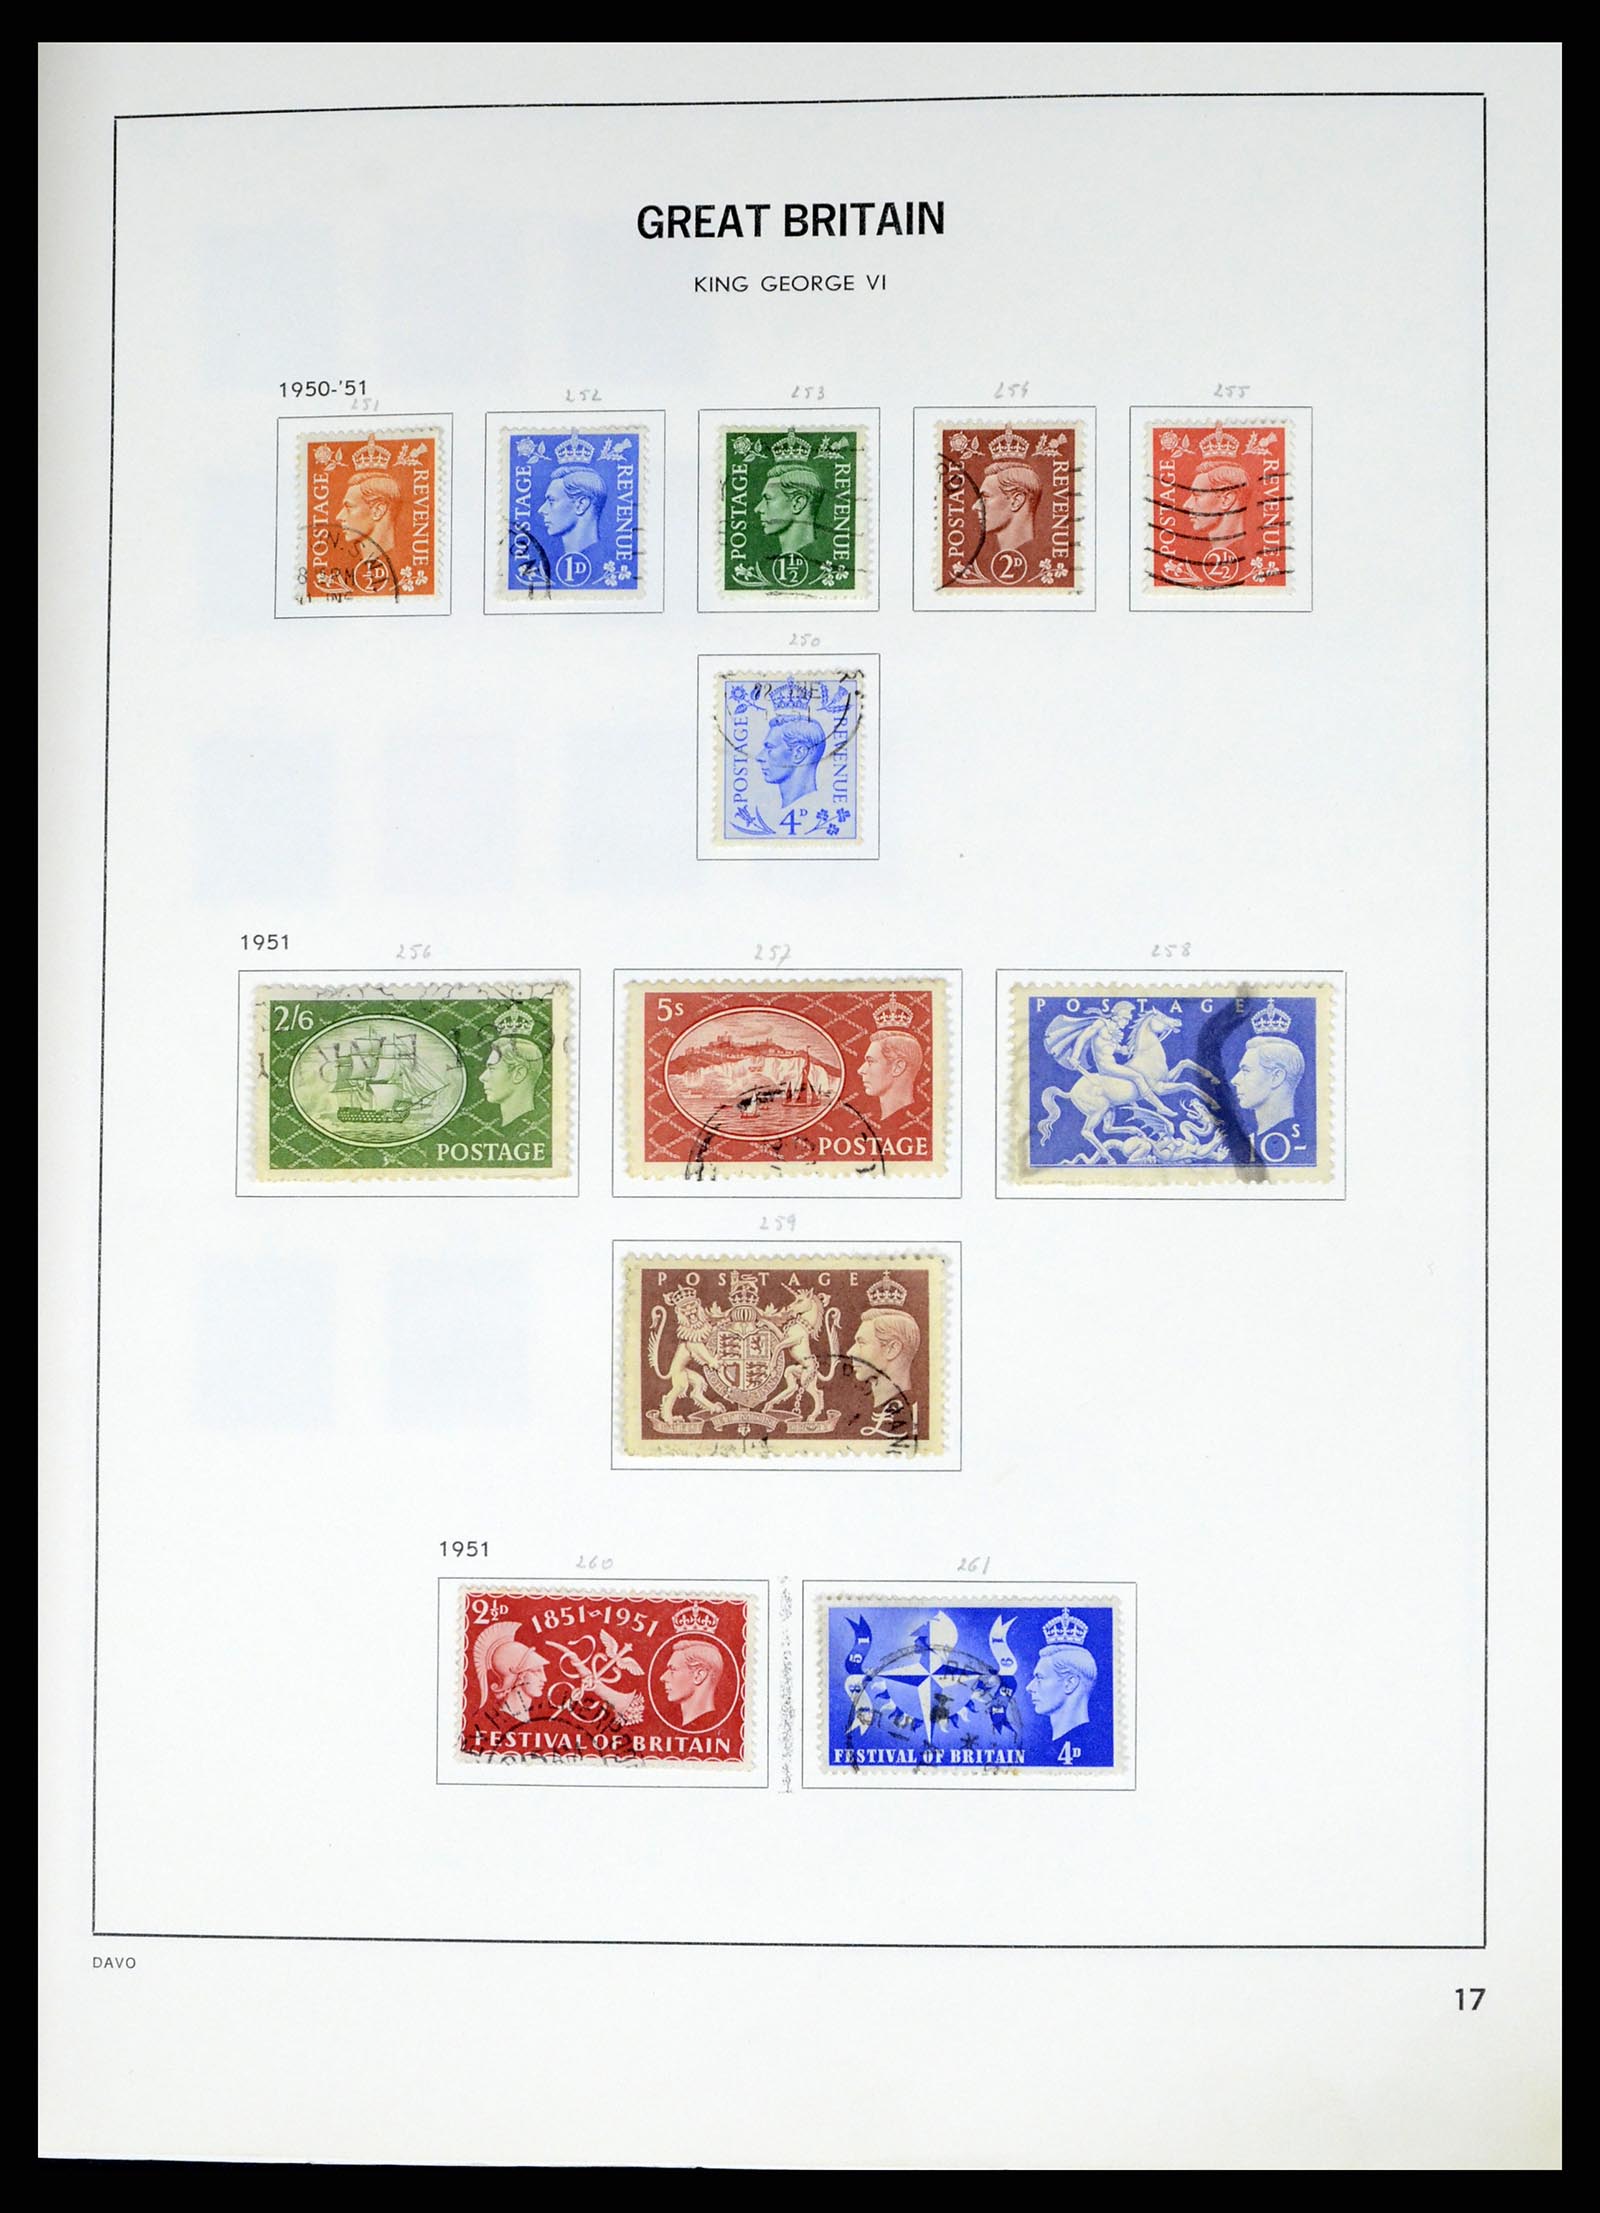 37375 040 - Stamp collection 37375 Great Britain 1840-1982.